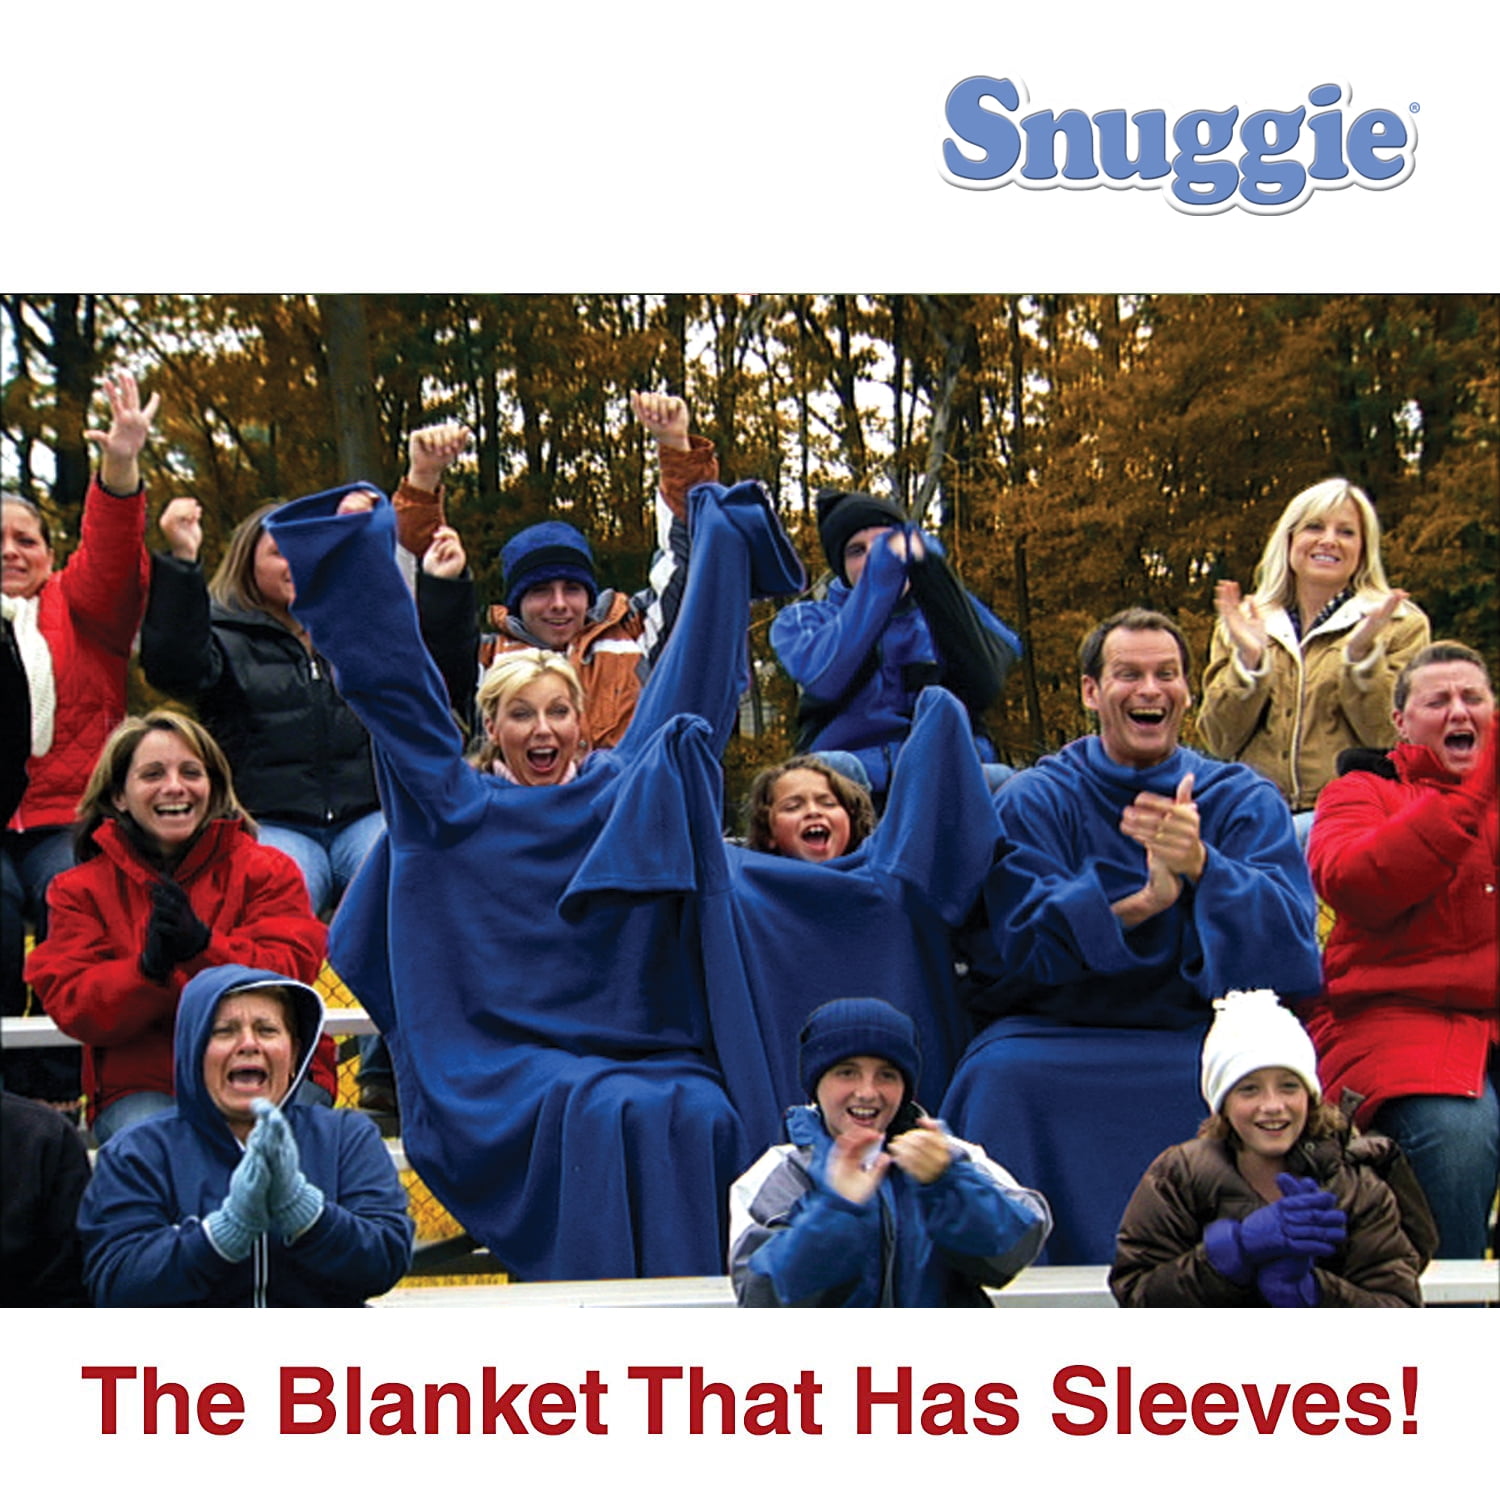 University of Louisville Snuggie-The Blanket with Sleeves